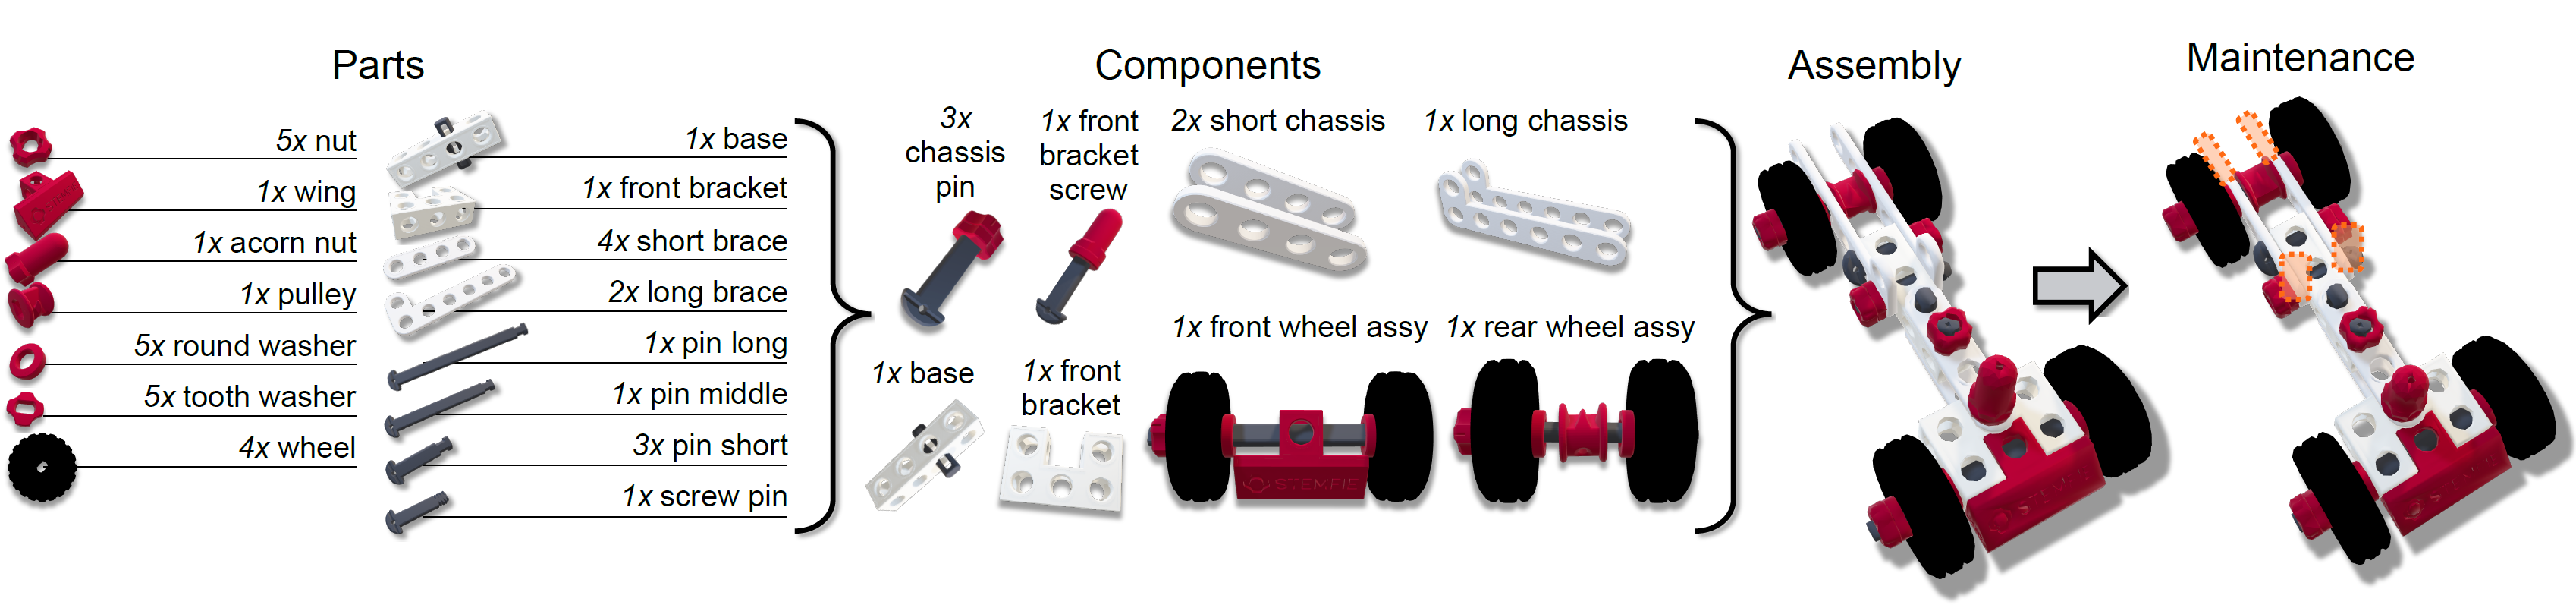 Overview of the parts and components in IndustReal.